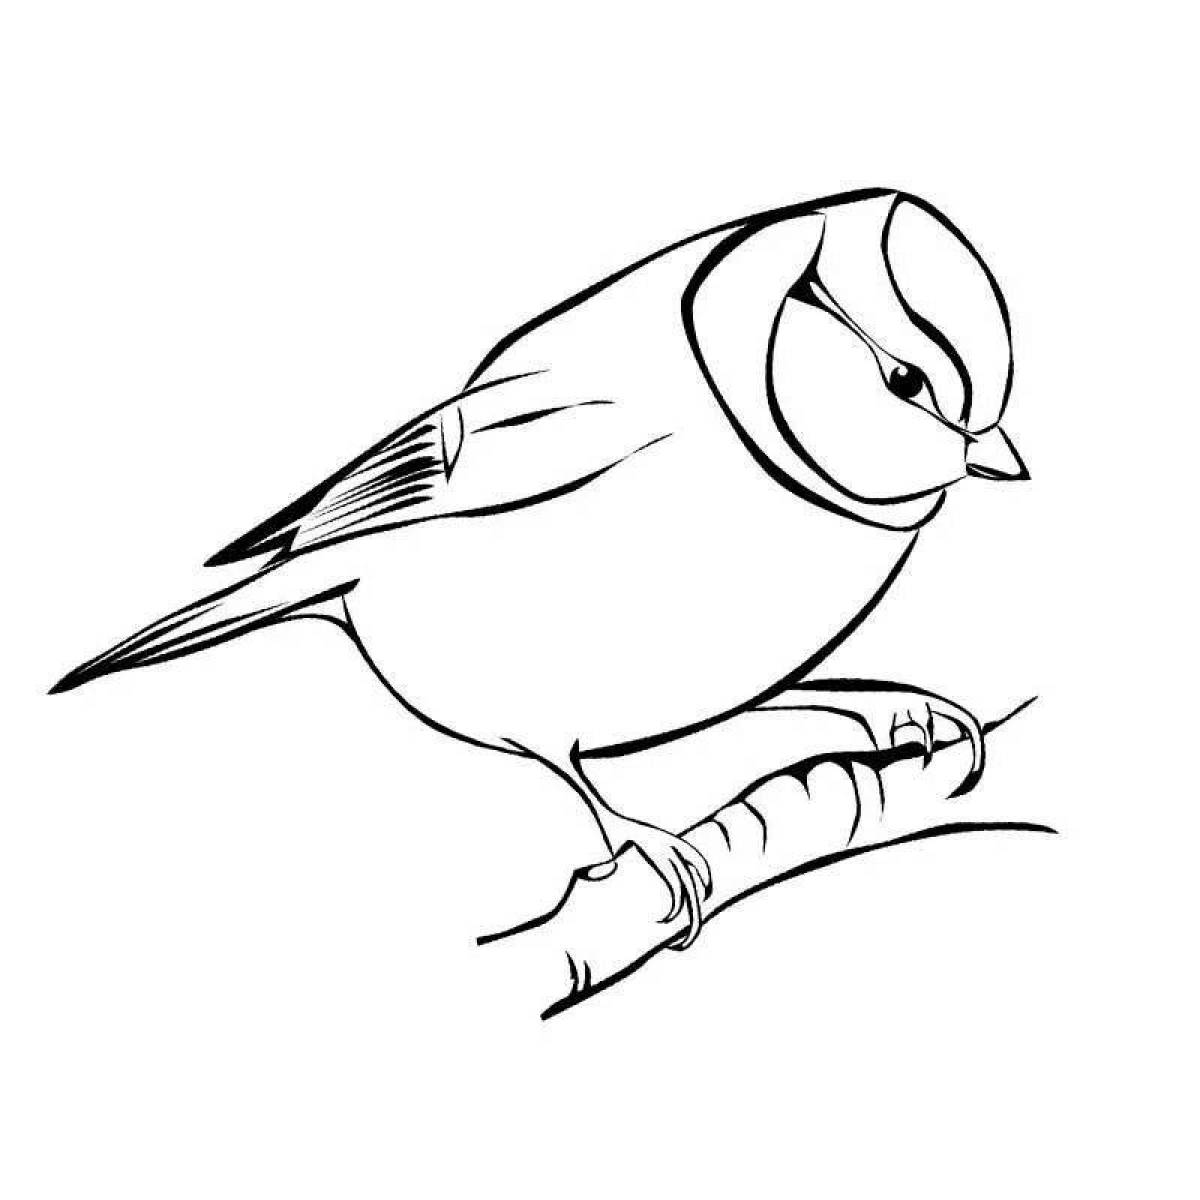 Coloring live sparrow for kids